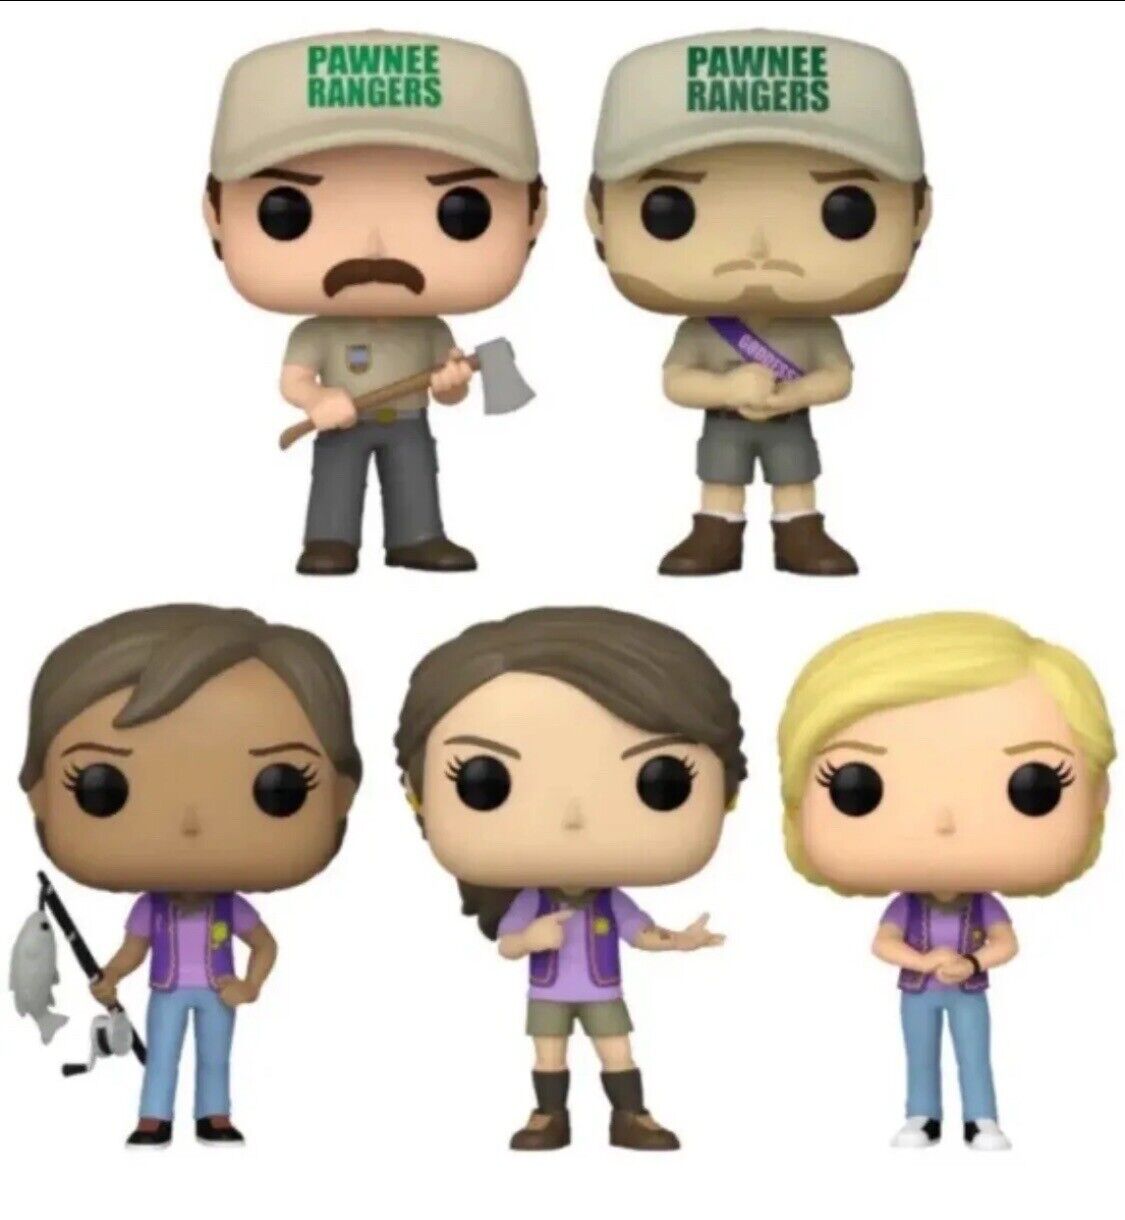 Funko Pop TV Park And Recreation Complete Set Of 5 Pawnee Goddessses And Rangers